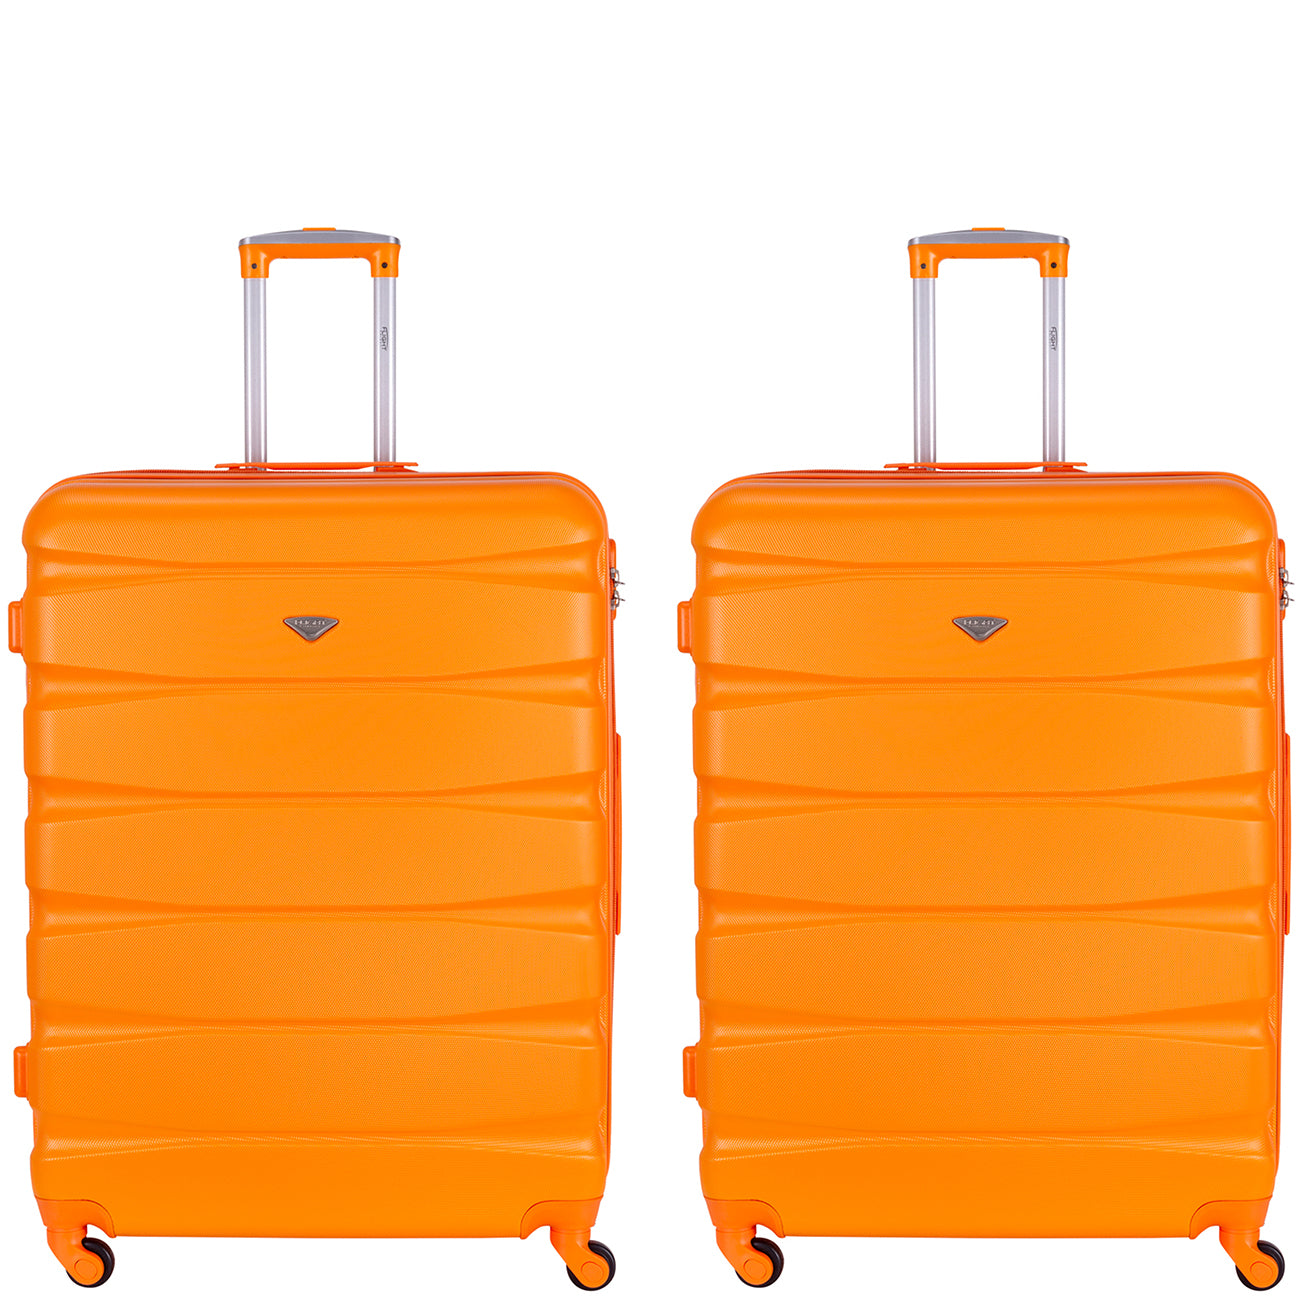 Lightweight 4 Wheel ABS Hard Case Suitcases Cabin & Hold Luggage Options 100+ Airlines Approved